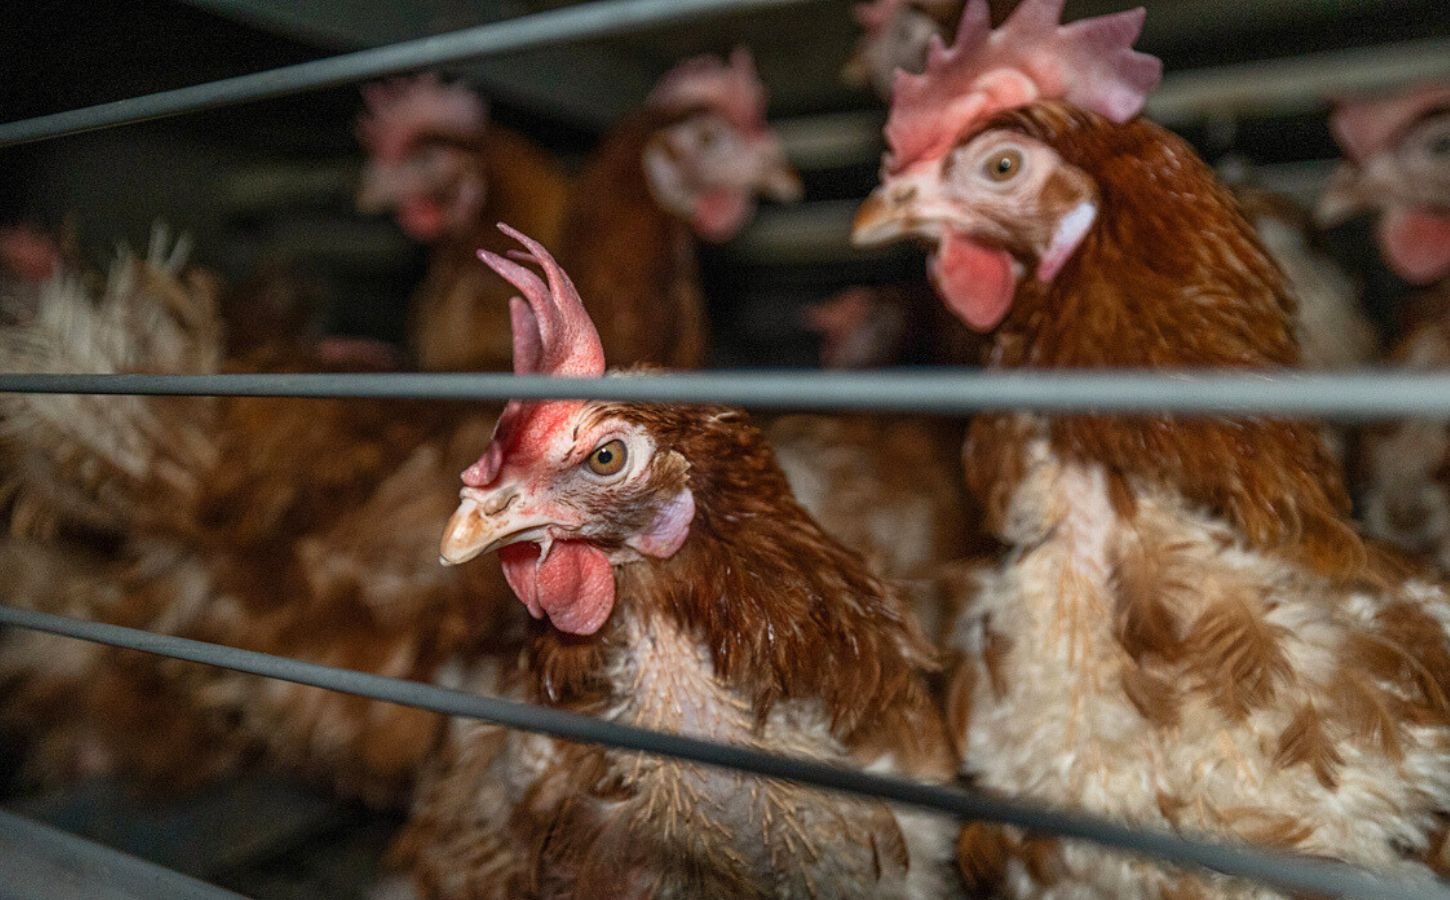 Hens at an intensive chicken farm, similar to the one that has caught fire in Texas